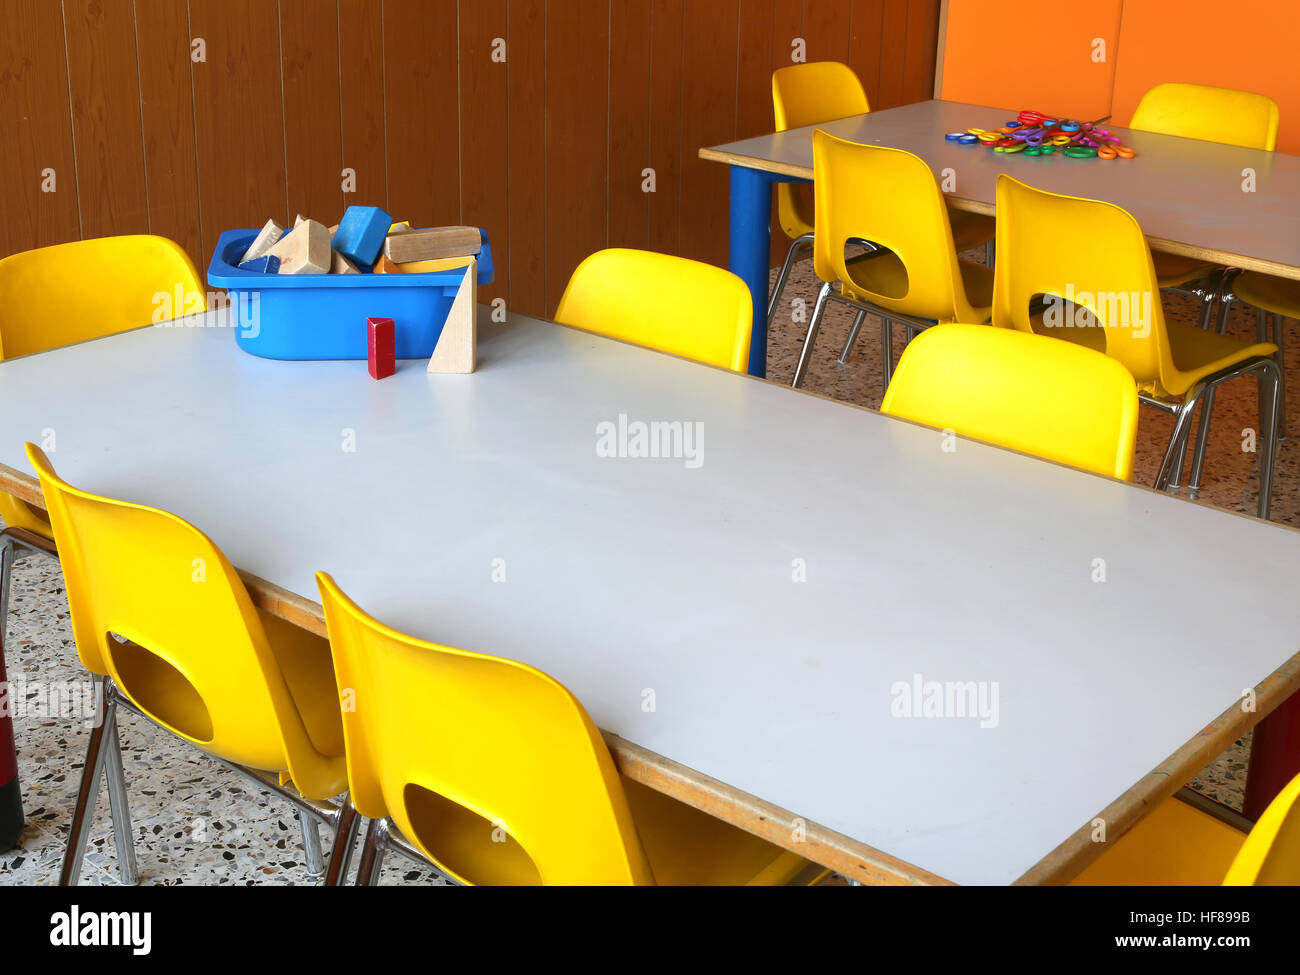 Tables And Chairs In The Classroom Of Kindergarten Without Children Stock Photo Alamy